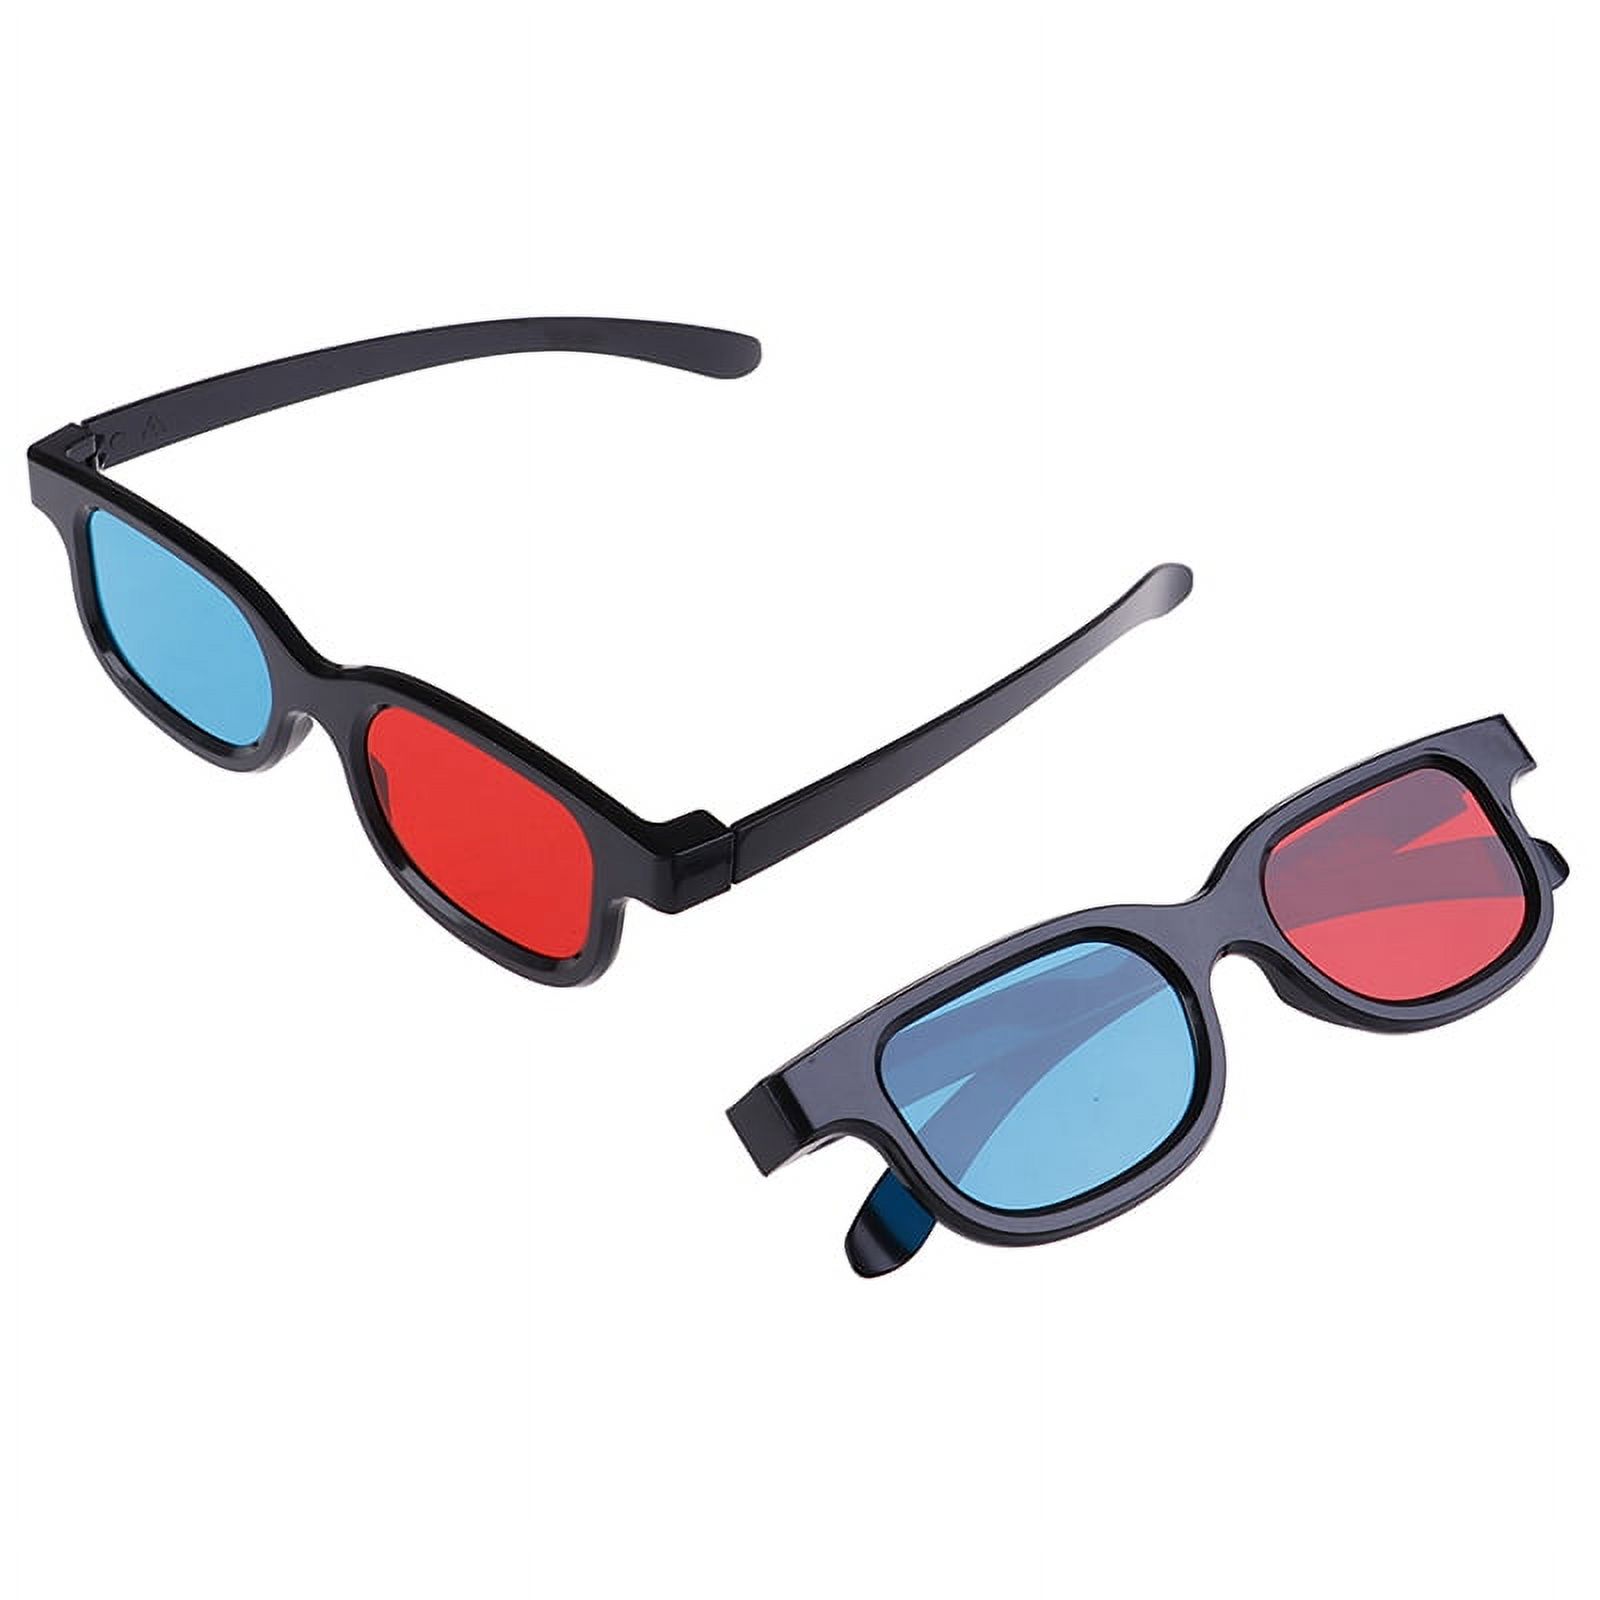 Universal red blue 3d glasses for dimensional anaglyph movie game - image 4 of 9